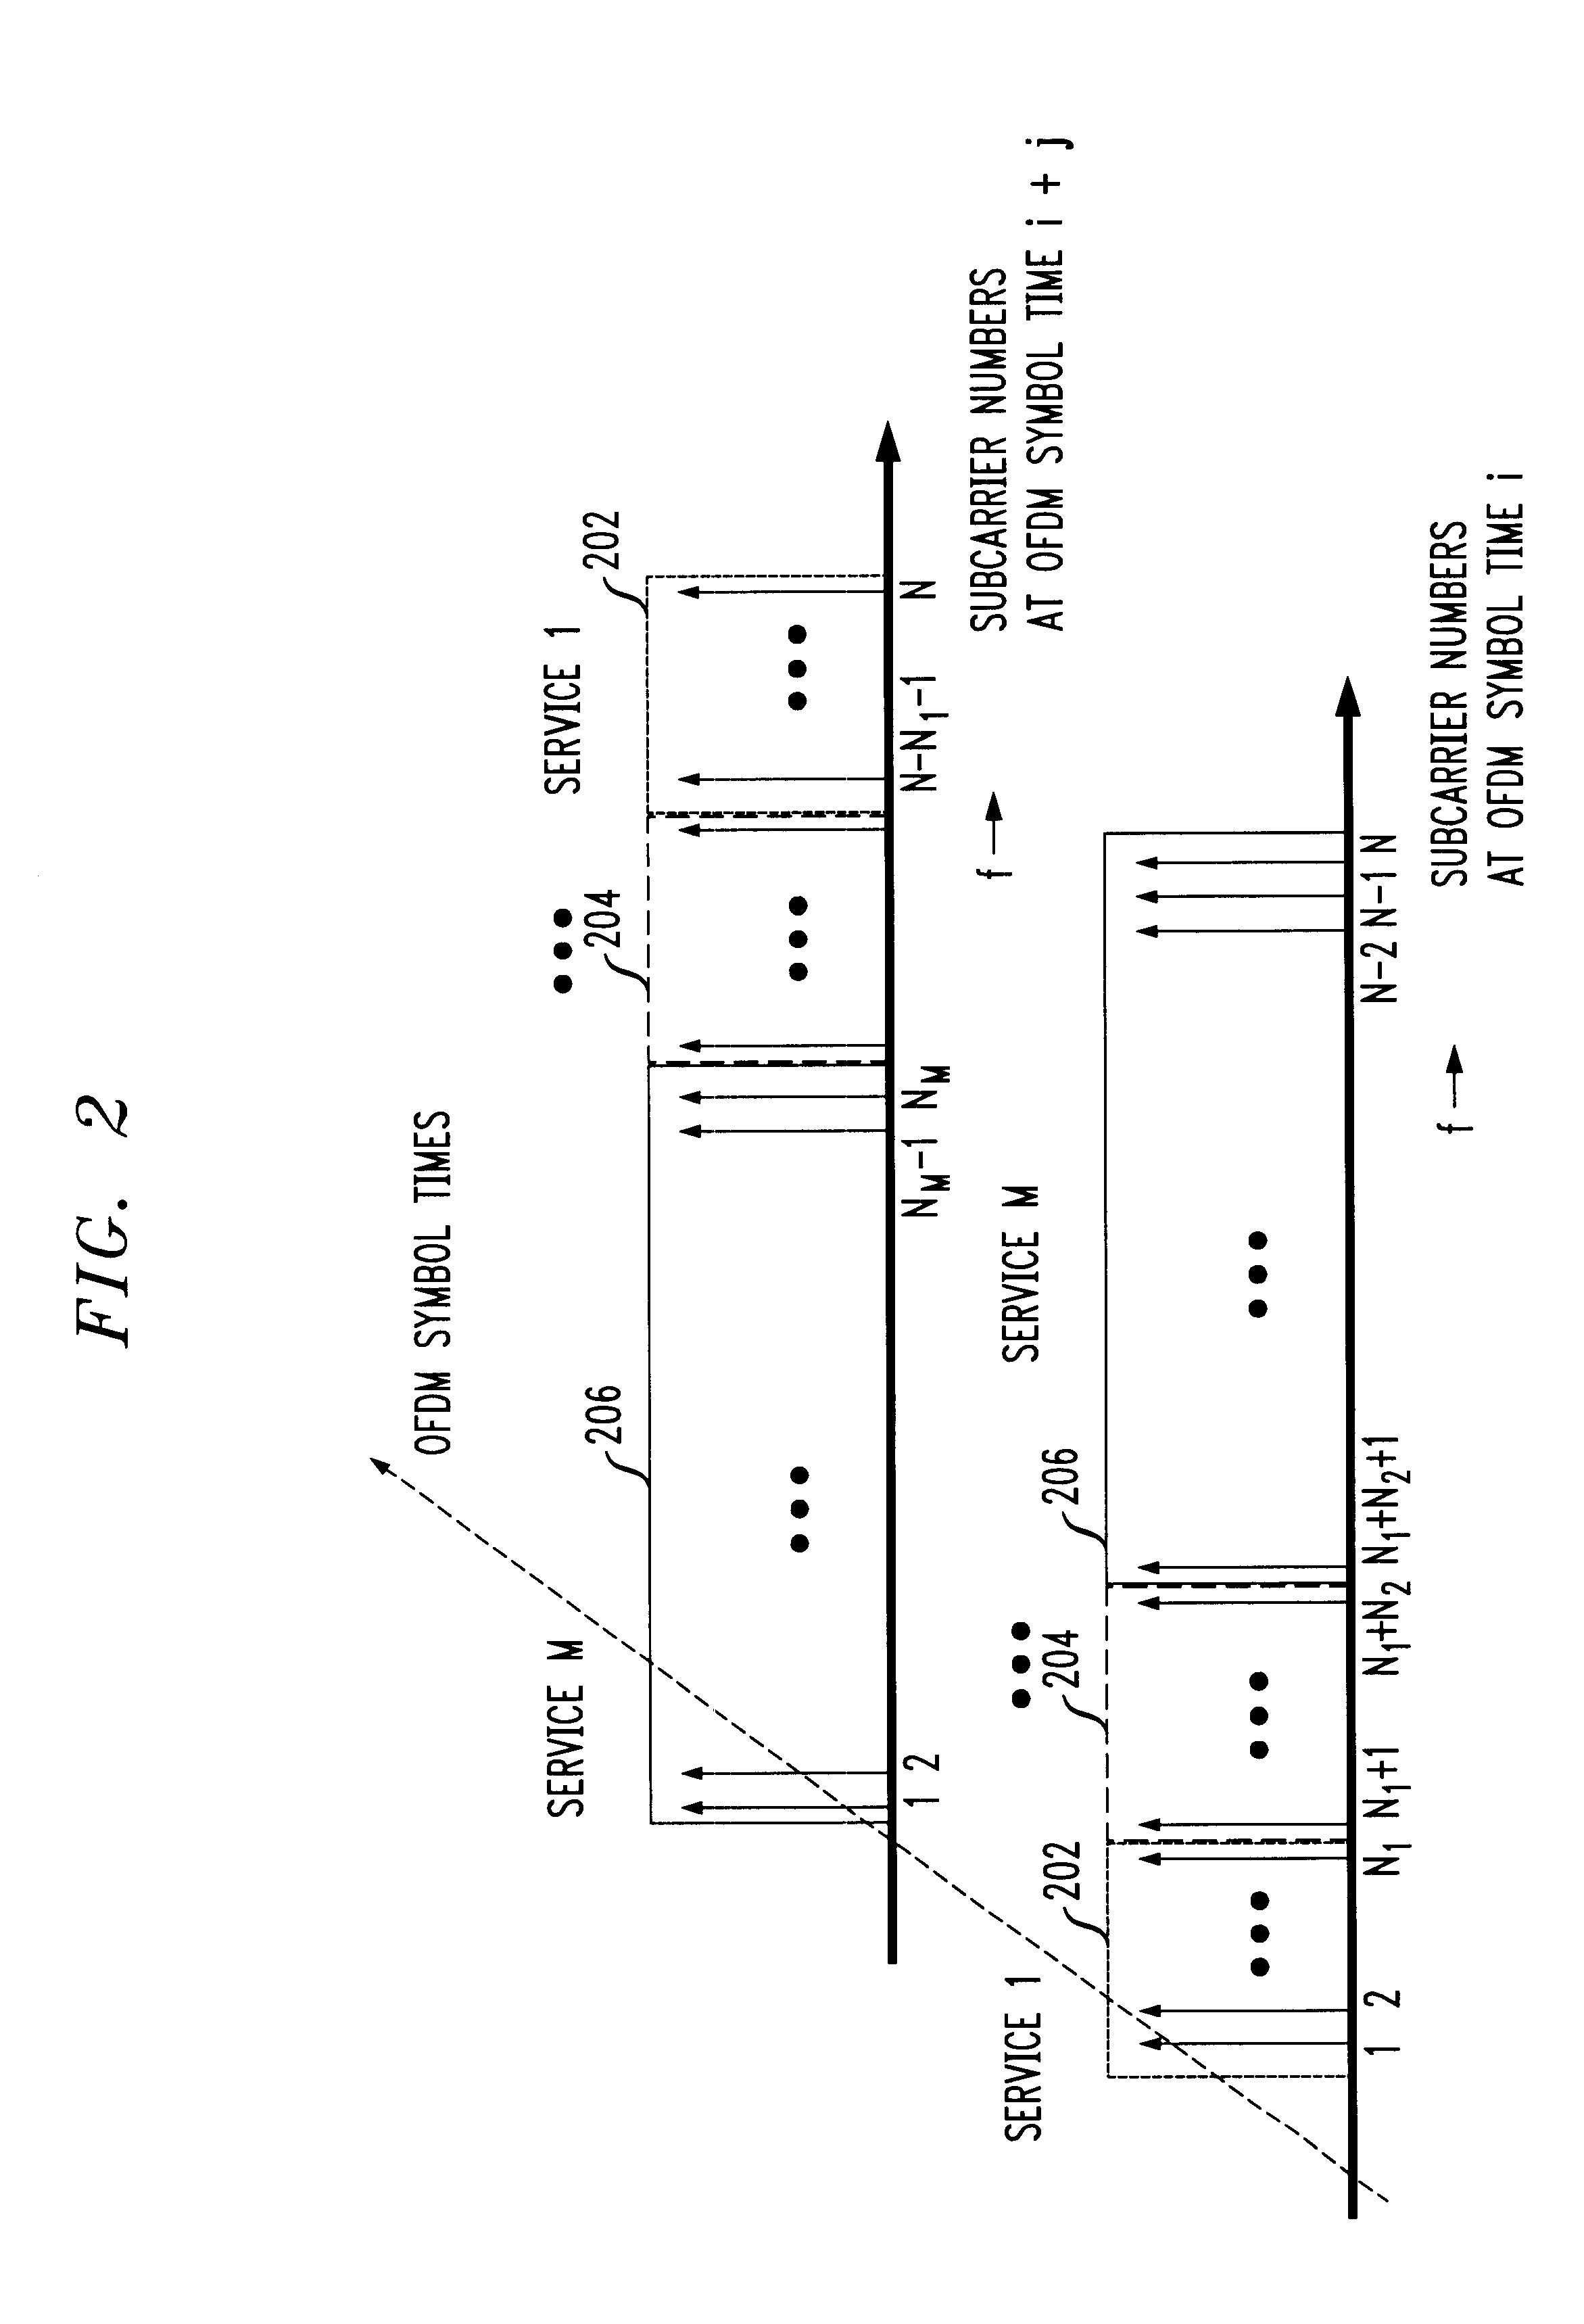 OFDM subcarrier hopping in a multi service OFDM system